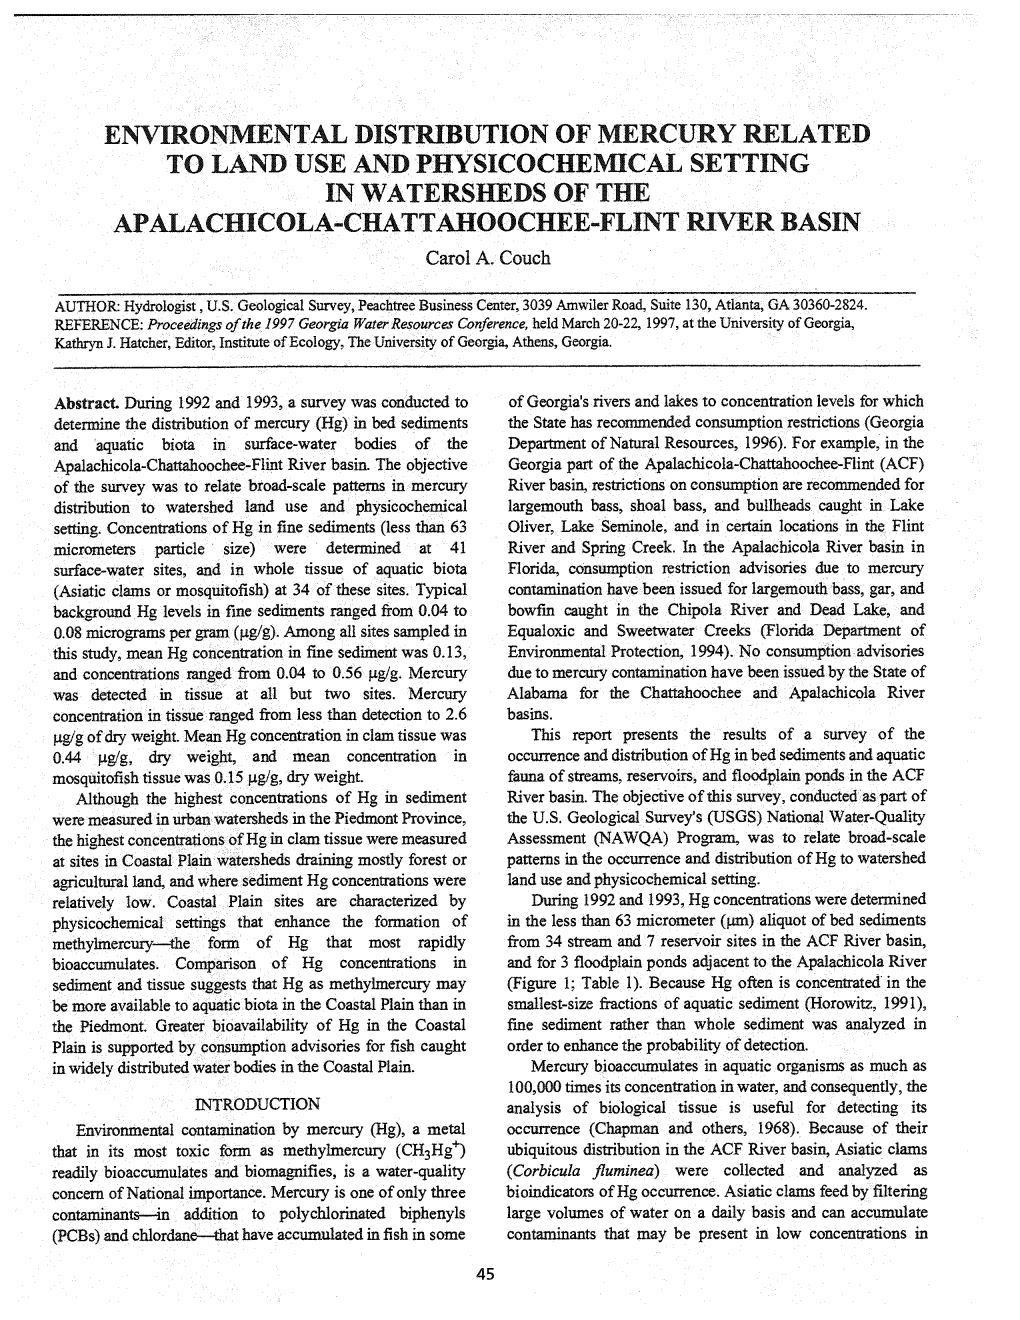 RONMENTAL DISTRIBUTION of MERCURY RELATED to LA USE and PHYSICOCHEMICAL SETTING in WATERSHEDS of the APALACHICOLA-CHATTAHOOCHEE-FLINT RIVER BASIN Carol A